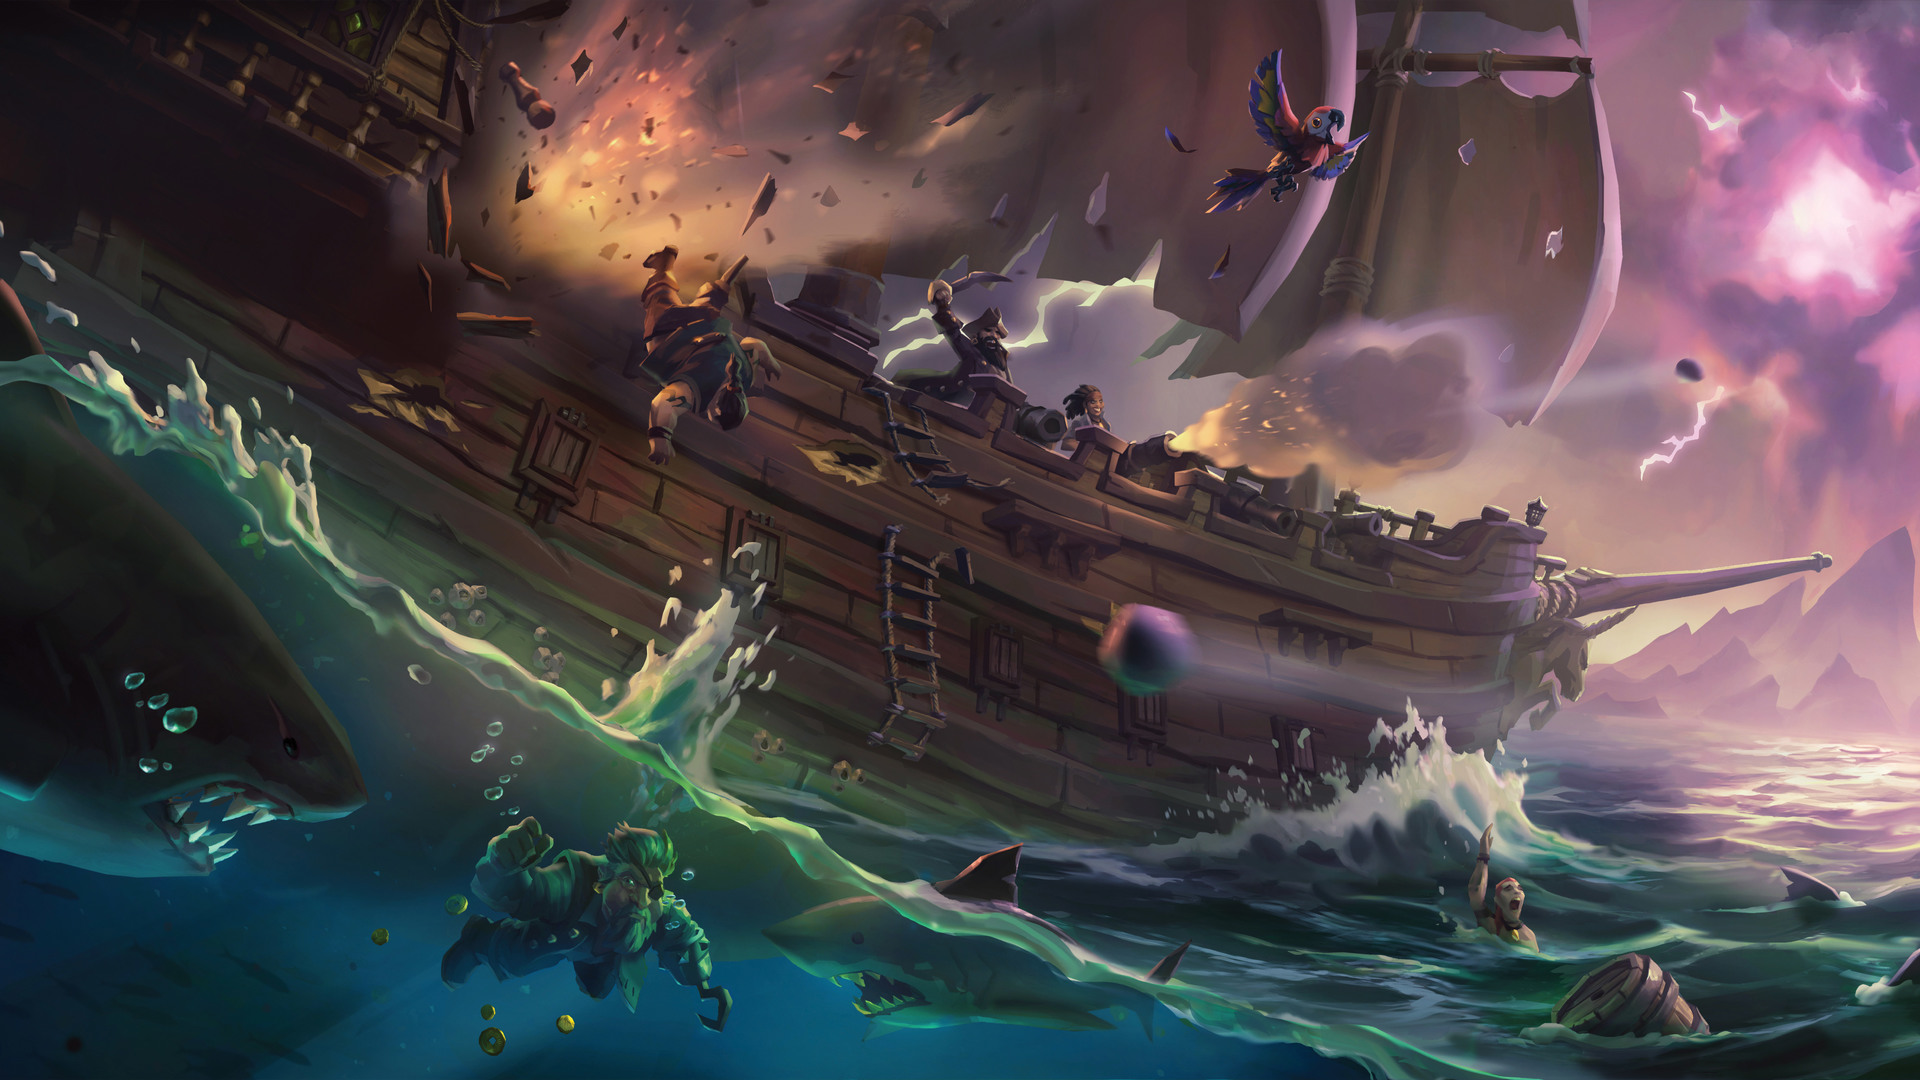 seaofthieves_cover_feature.jpg